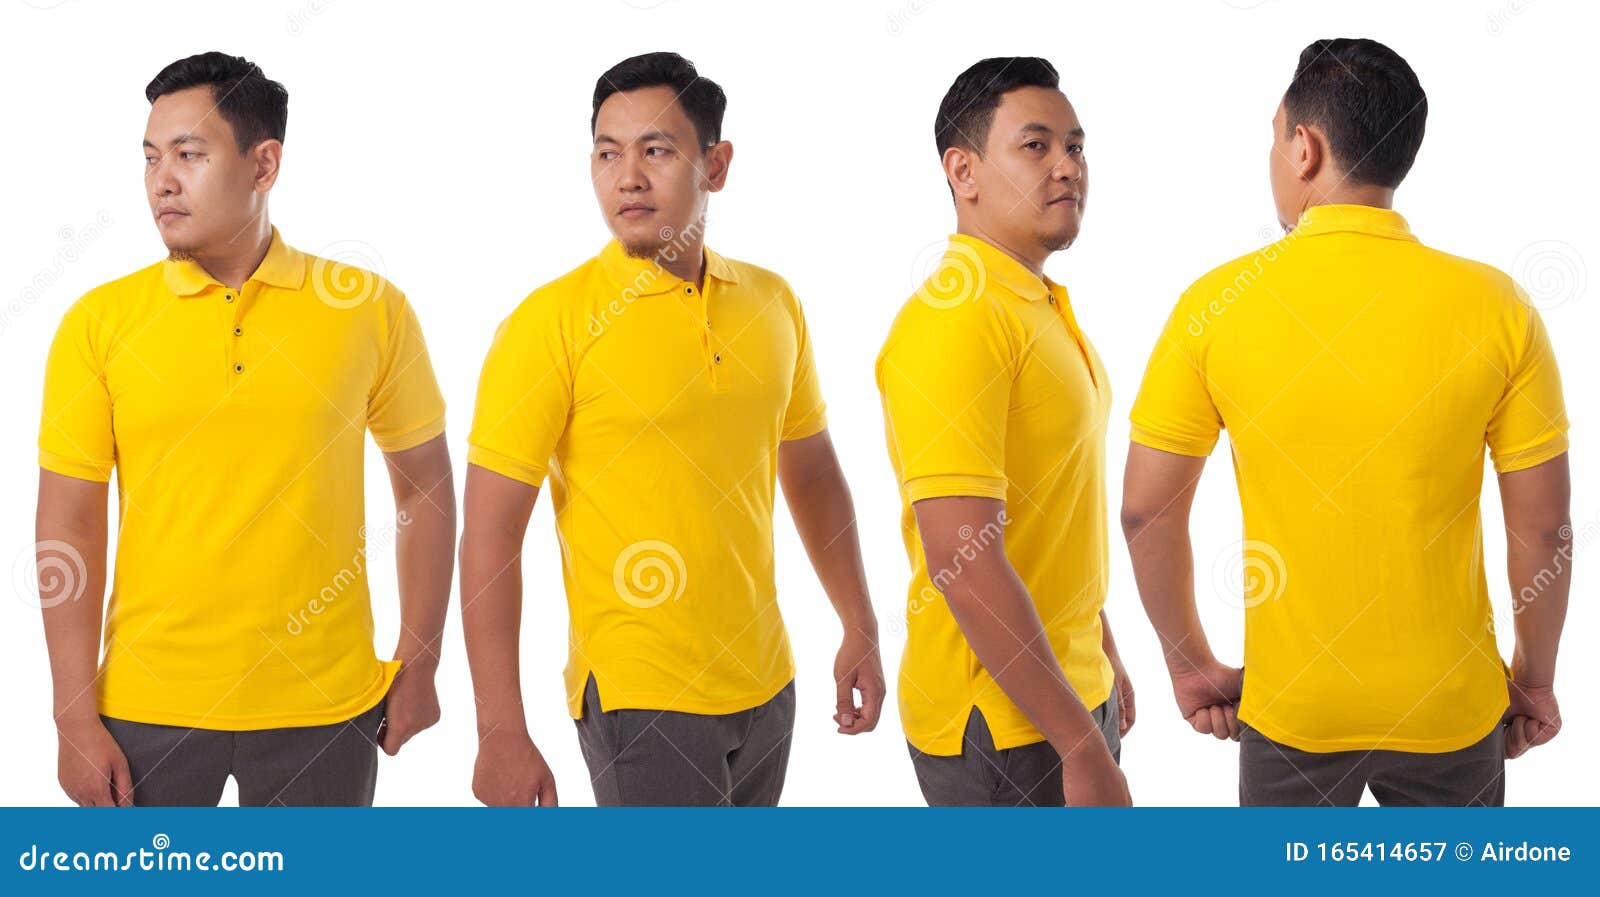 Yellow Collared Shirt Design Template Stock Image - Image of front ...